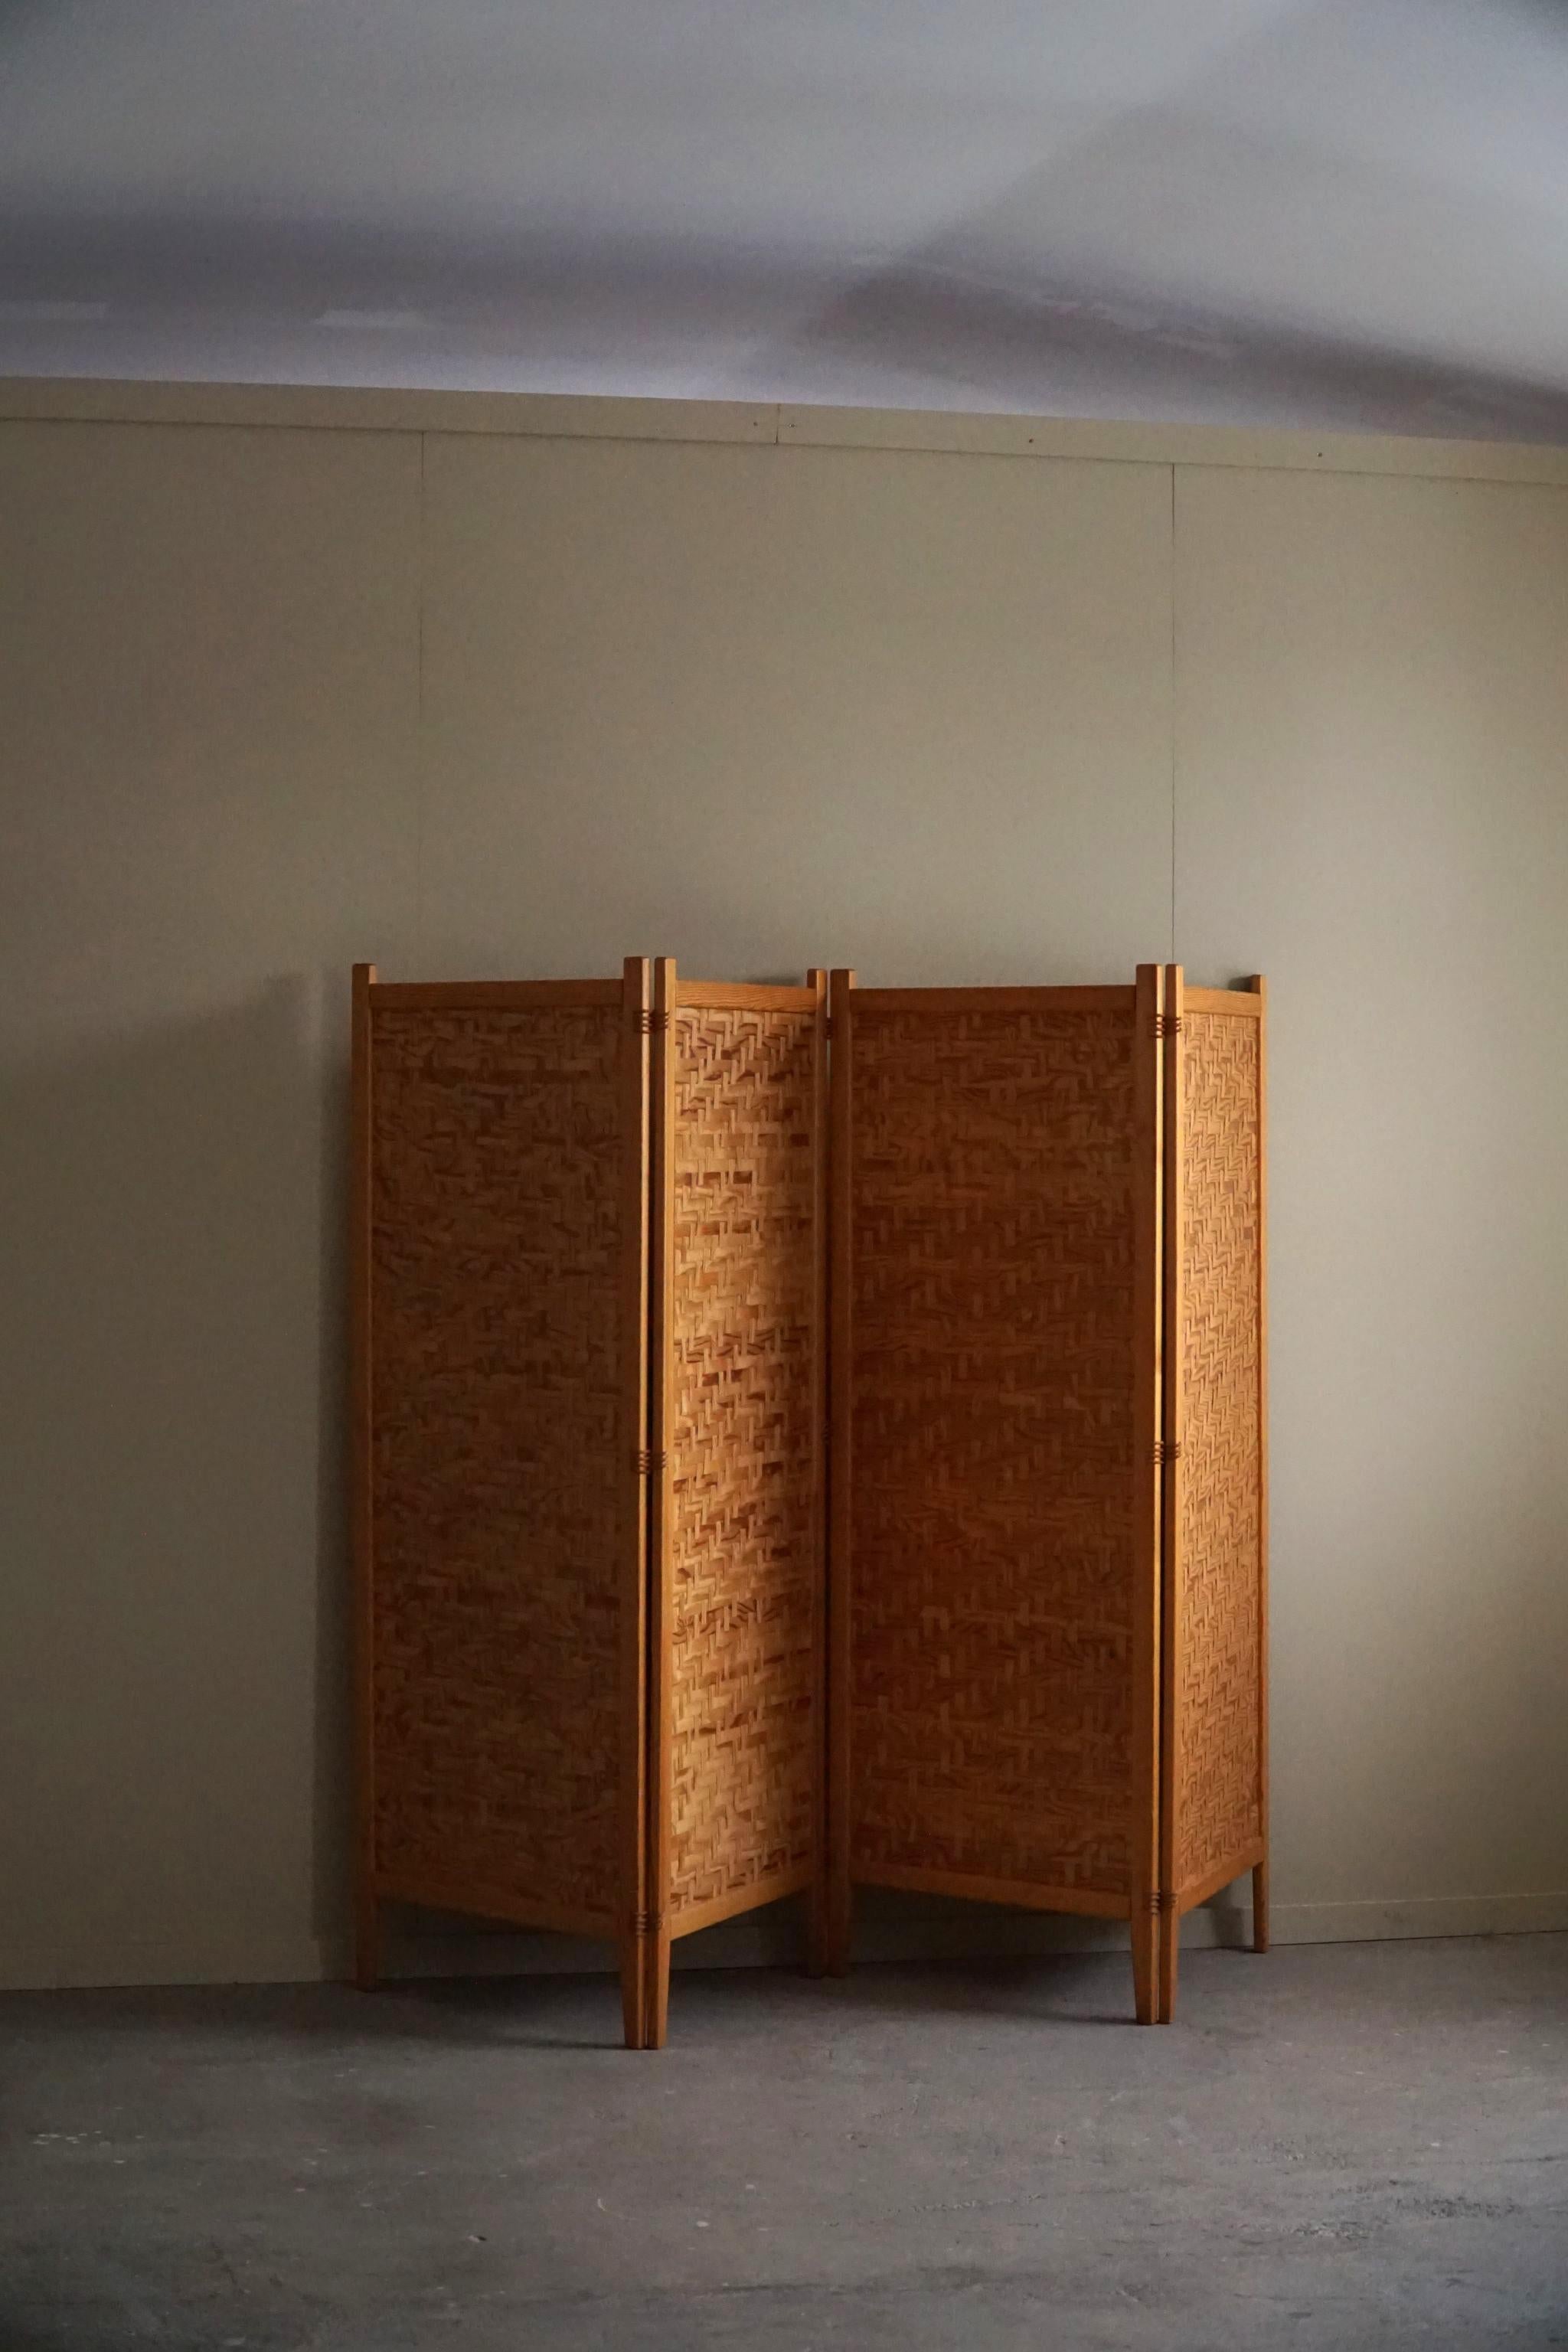 Introducing a Swedish Modern folding screen / roomdivider in pine and leather. Made by Alberts Tibro, Sweden, in the 1960s. A truly sculptural and artful piece, that will complement many interior styles. A Modern, Scandinavian, Japandi or an Art